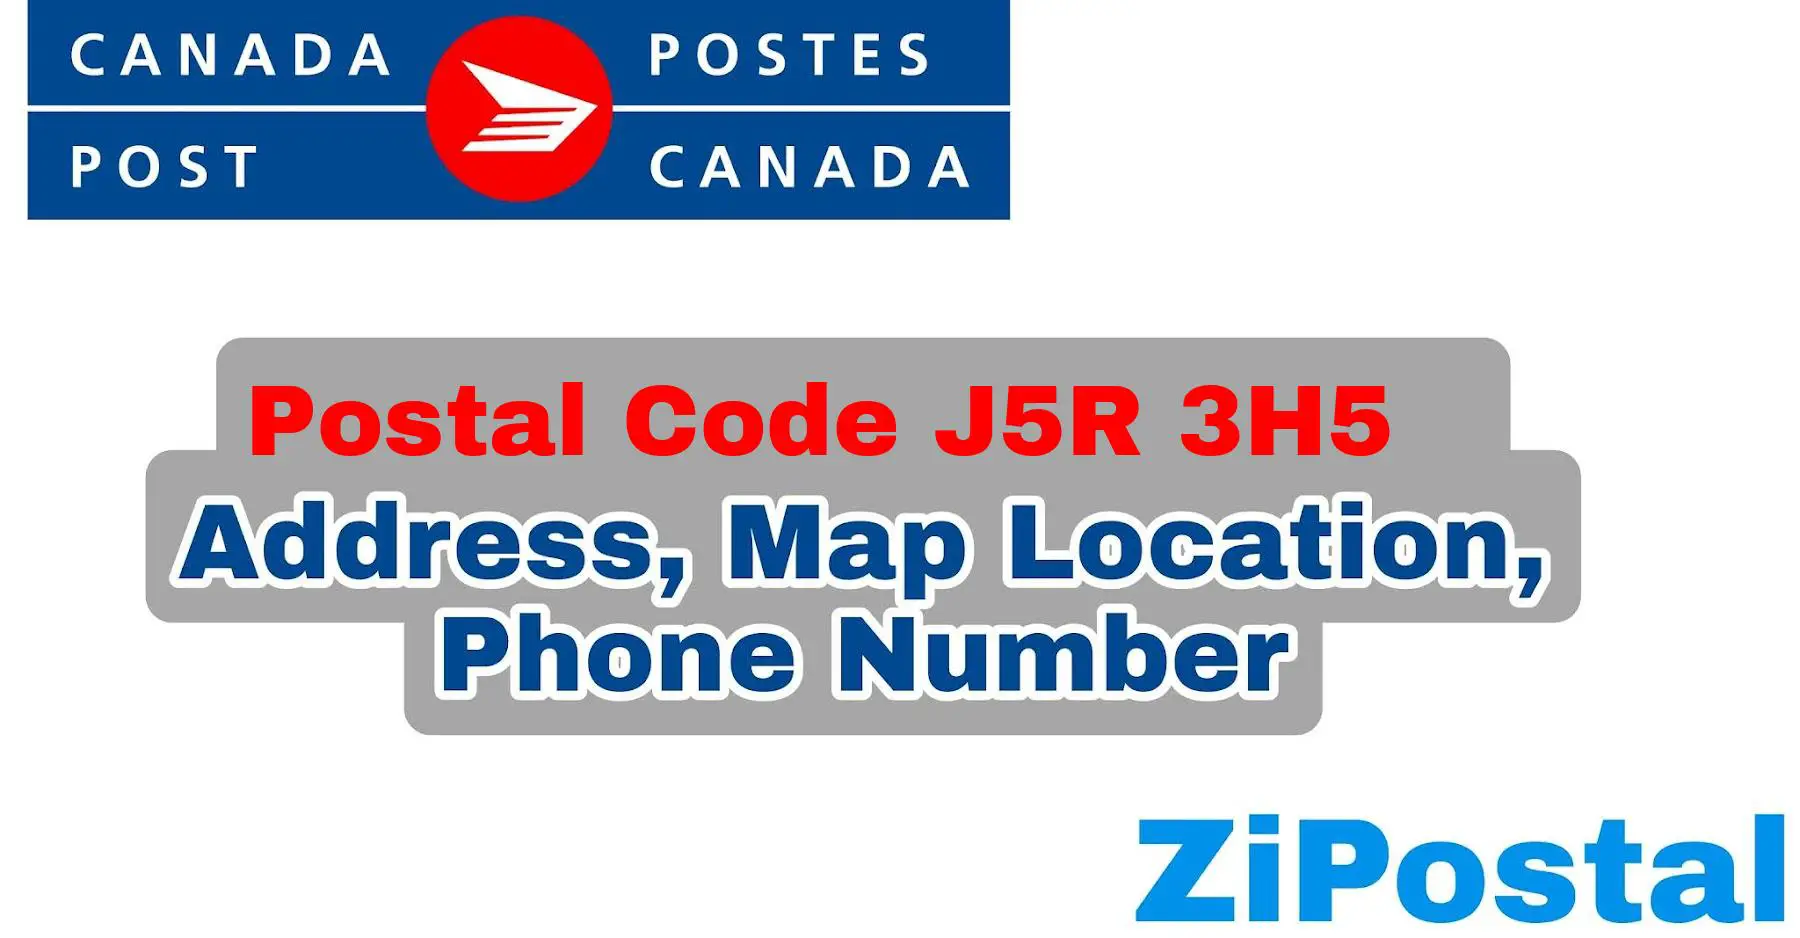 Postal Code J5R 3H5 Address Map Location and Phone Number